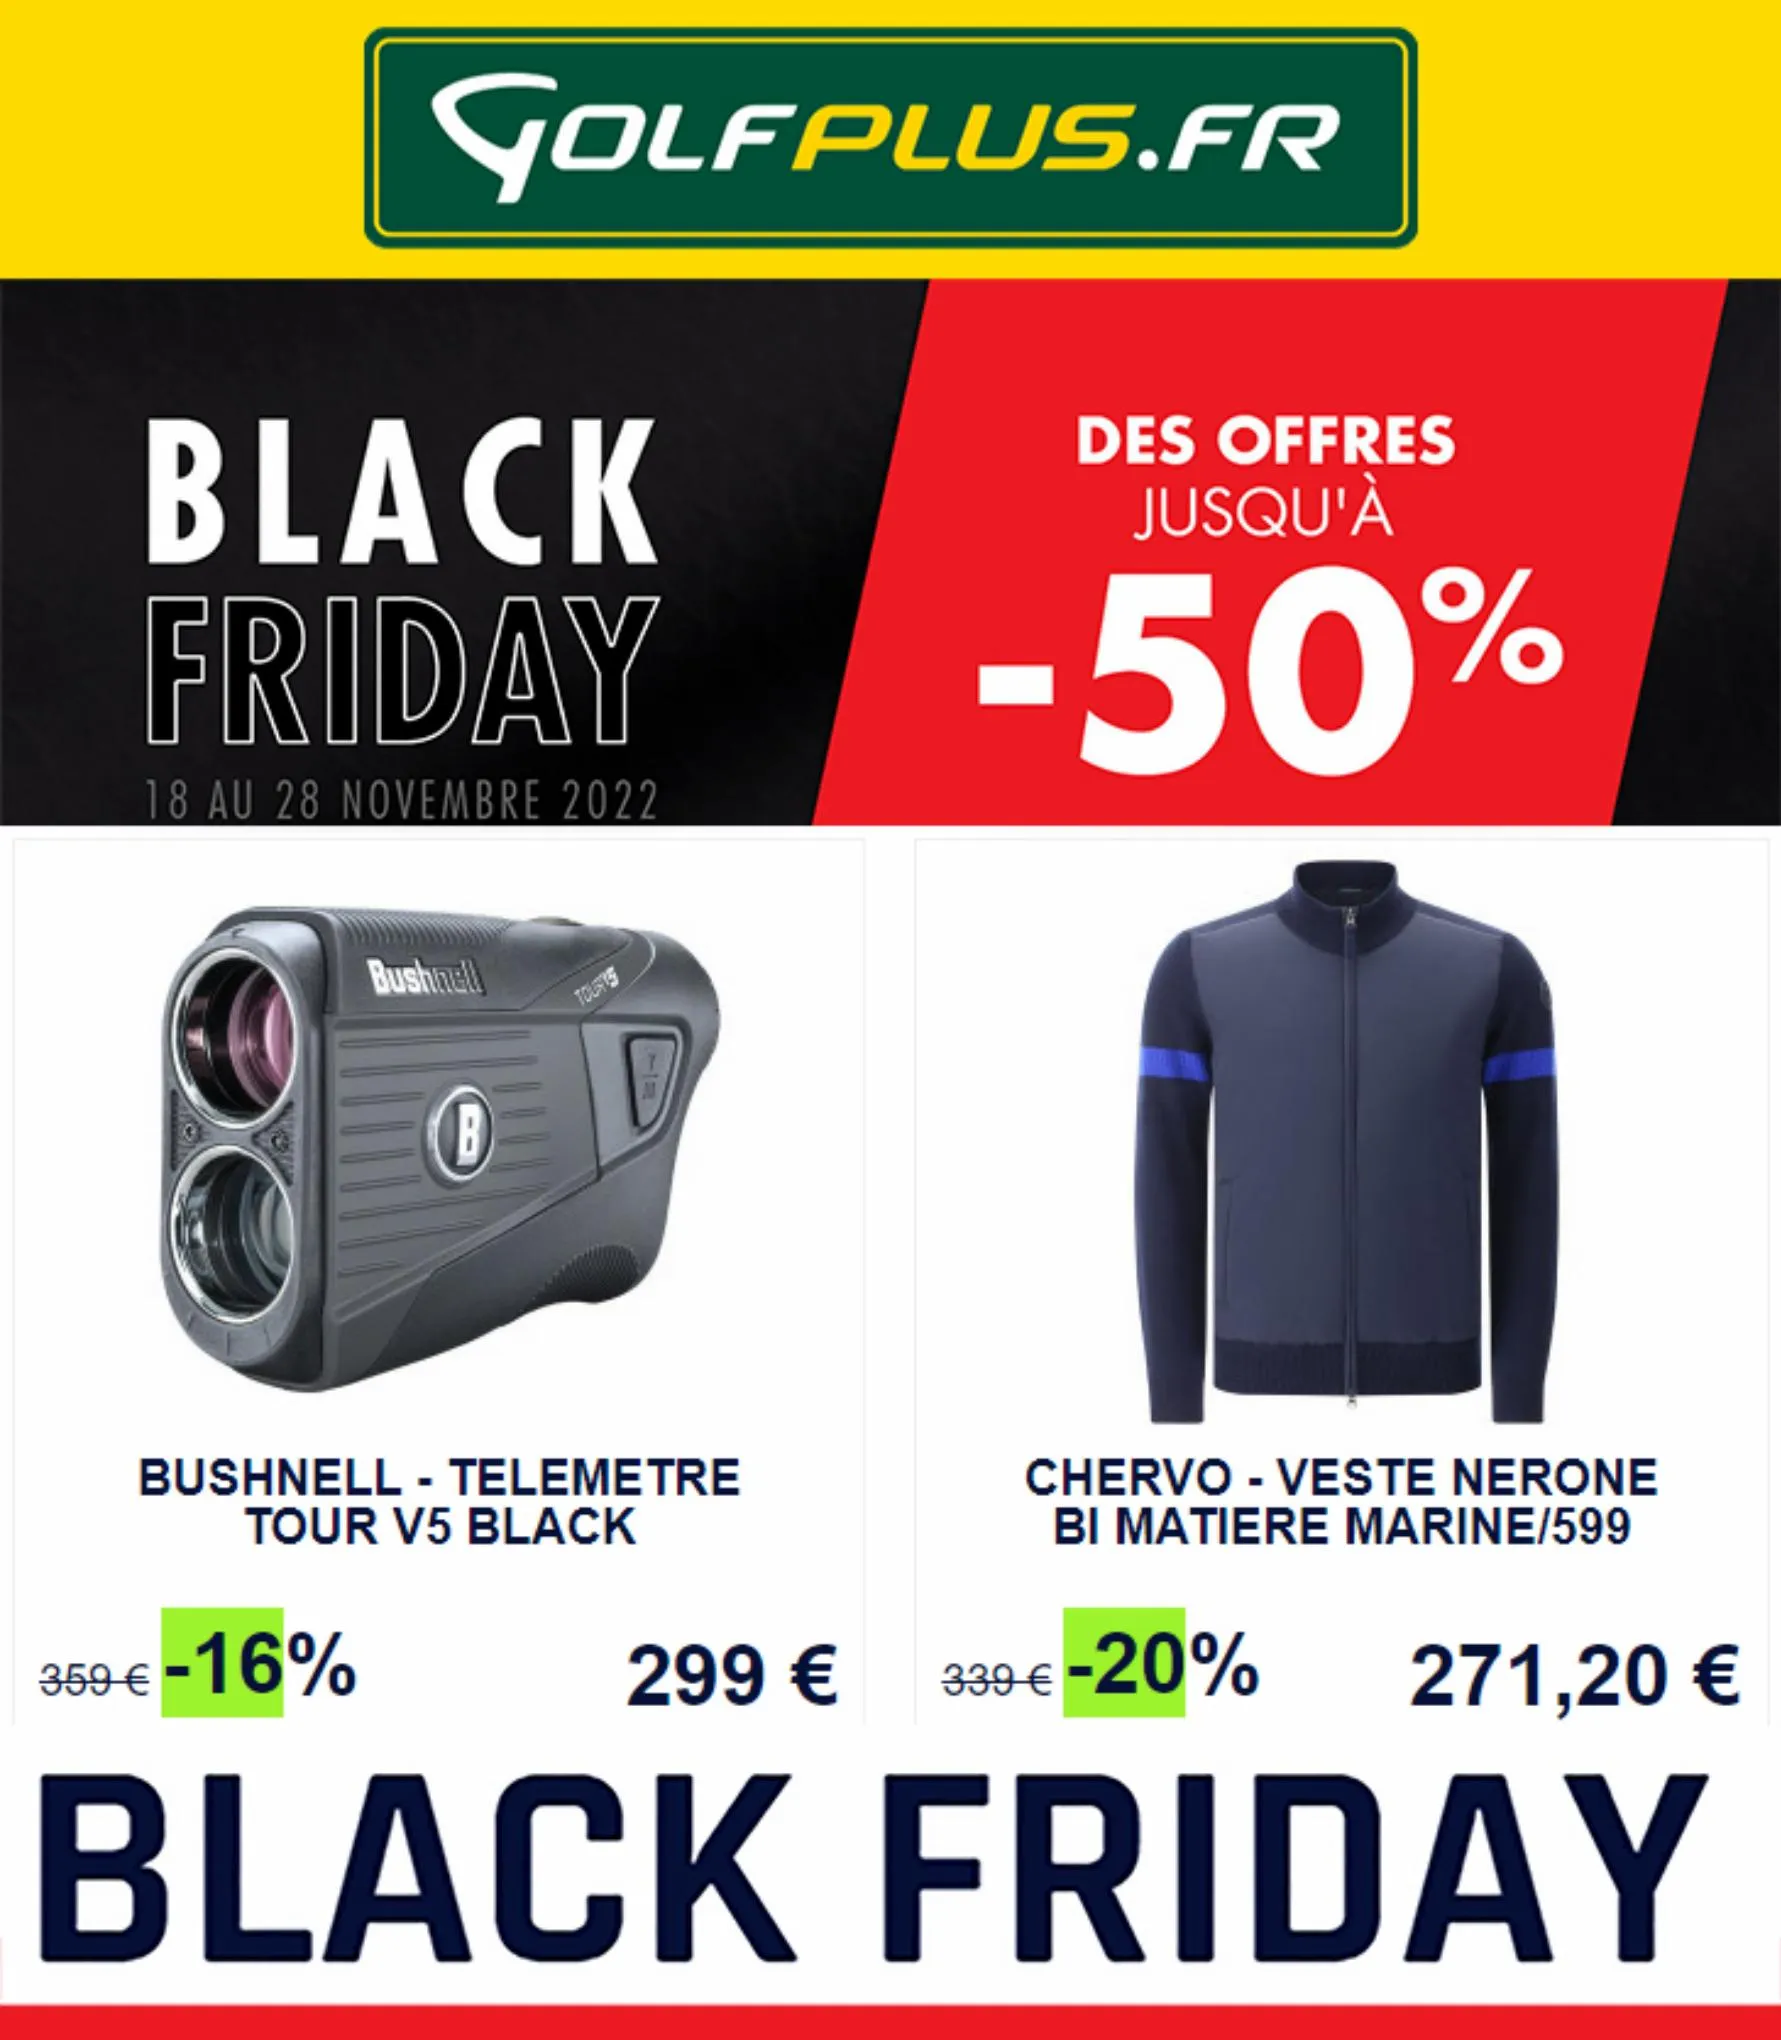 Catalogue Black Friday Offers -50%!, page 00001